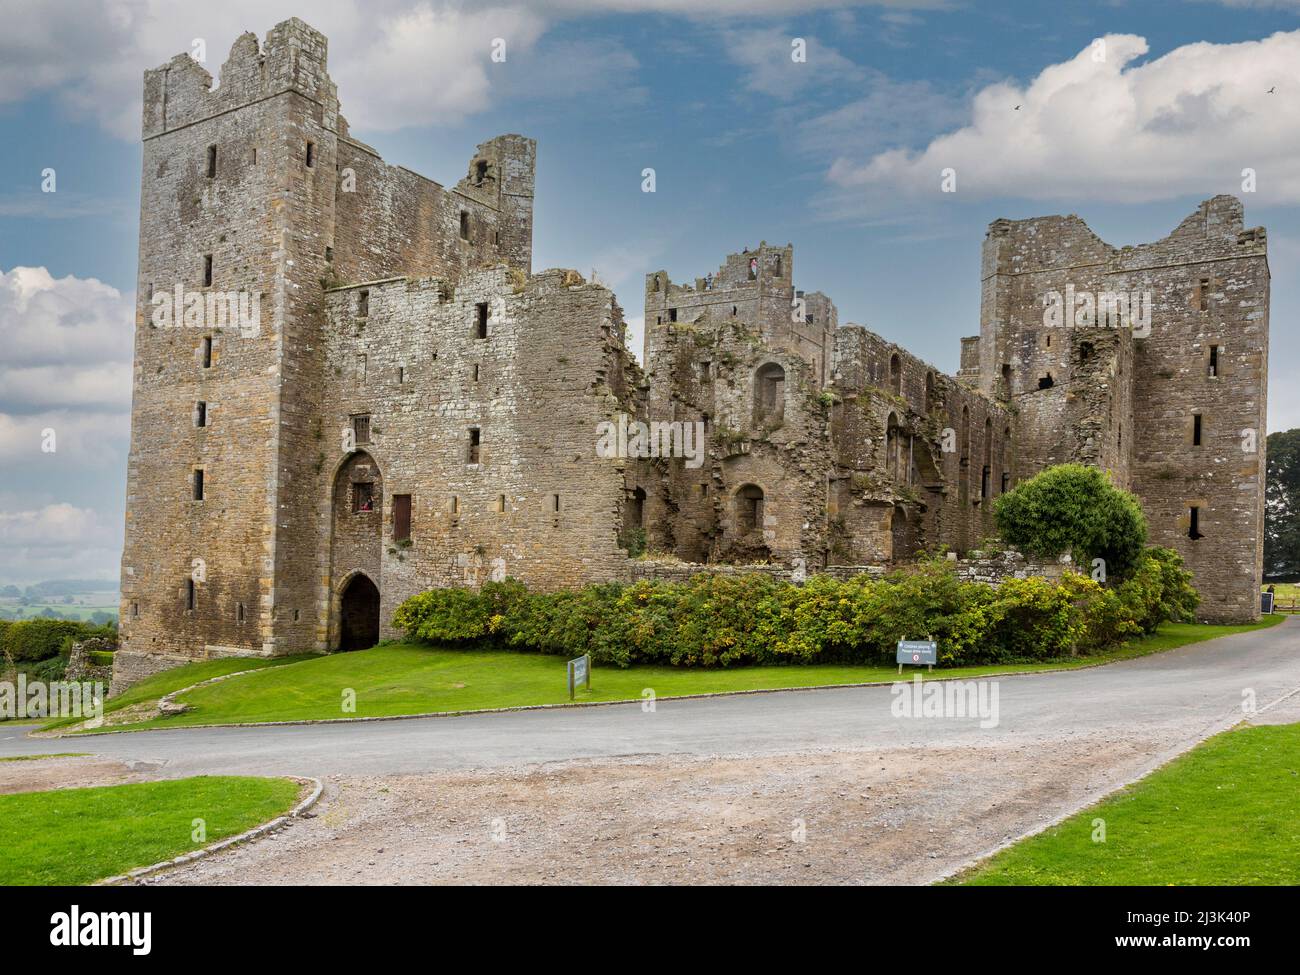 UK, England, Yorkshire.  Bolton Castle, finished 1399, where Mary Queen of Scots was imprisoned several months in 1568-69. Stock Photo